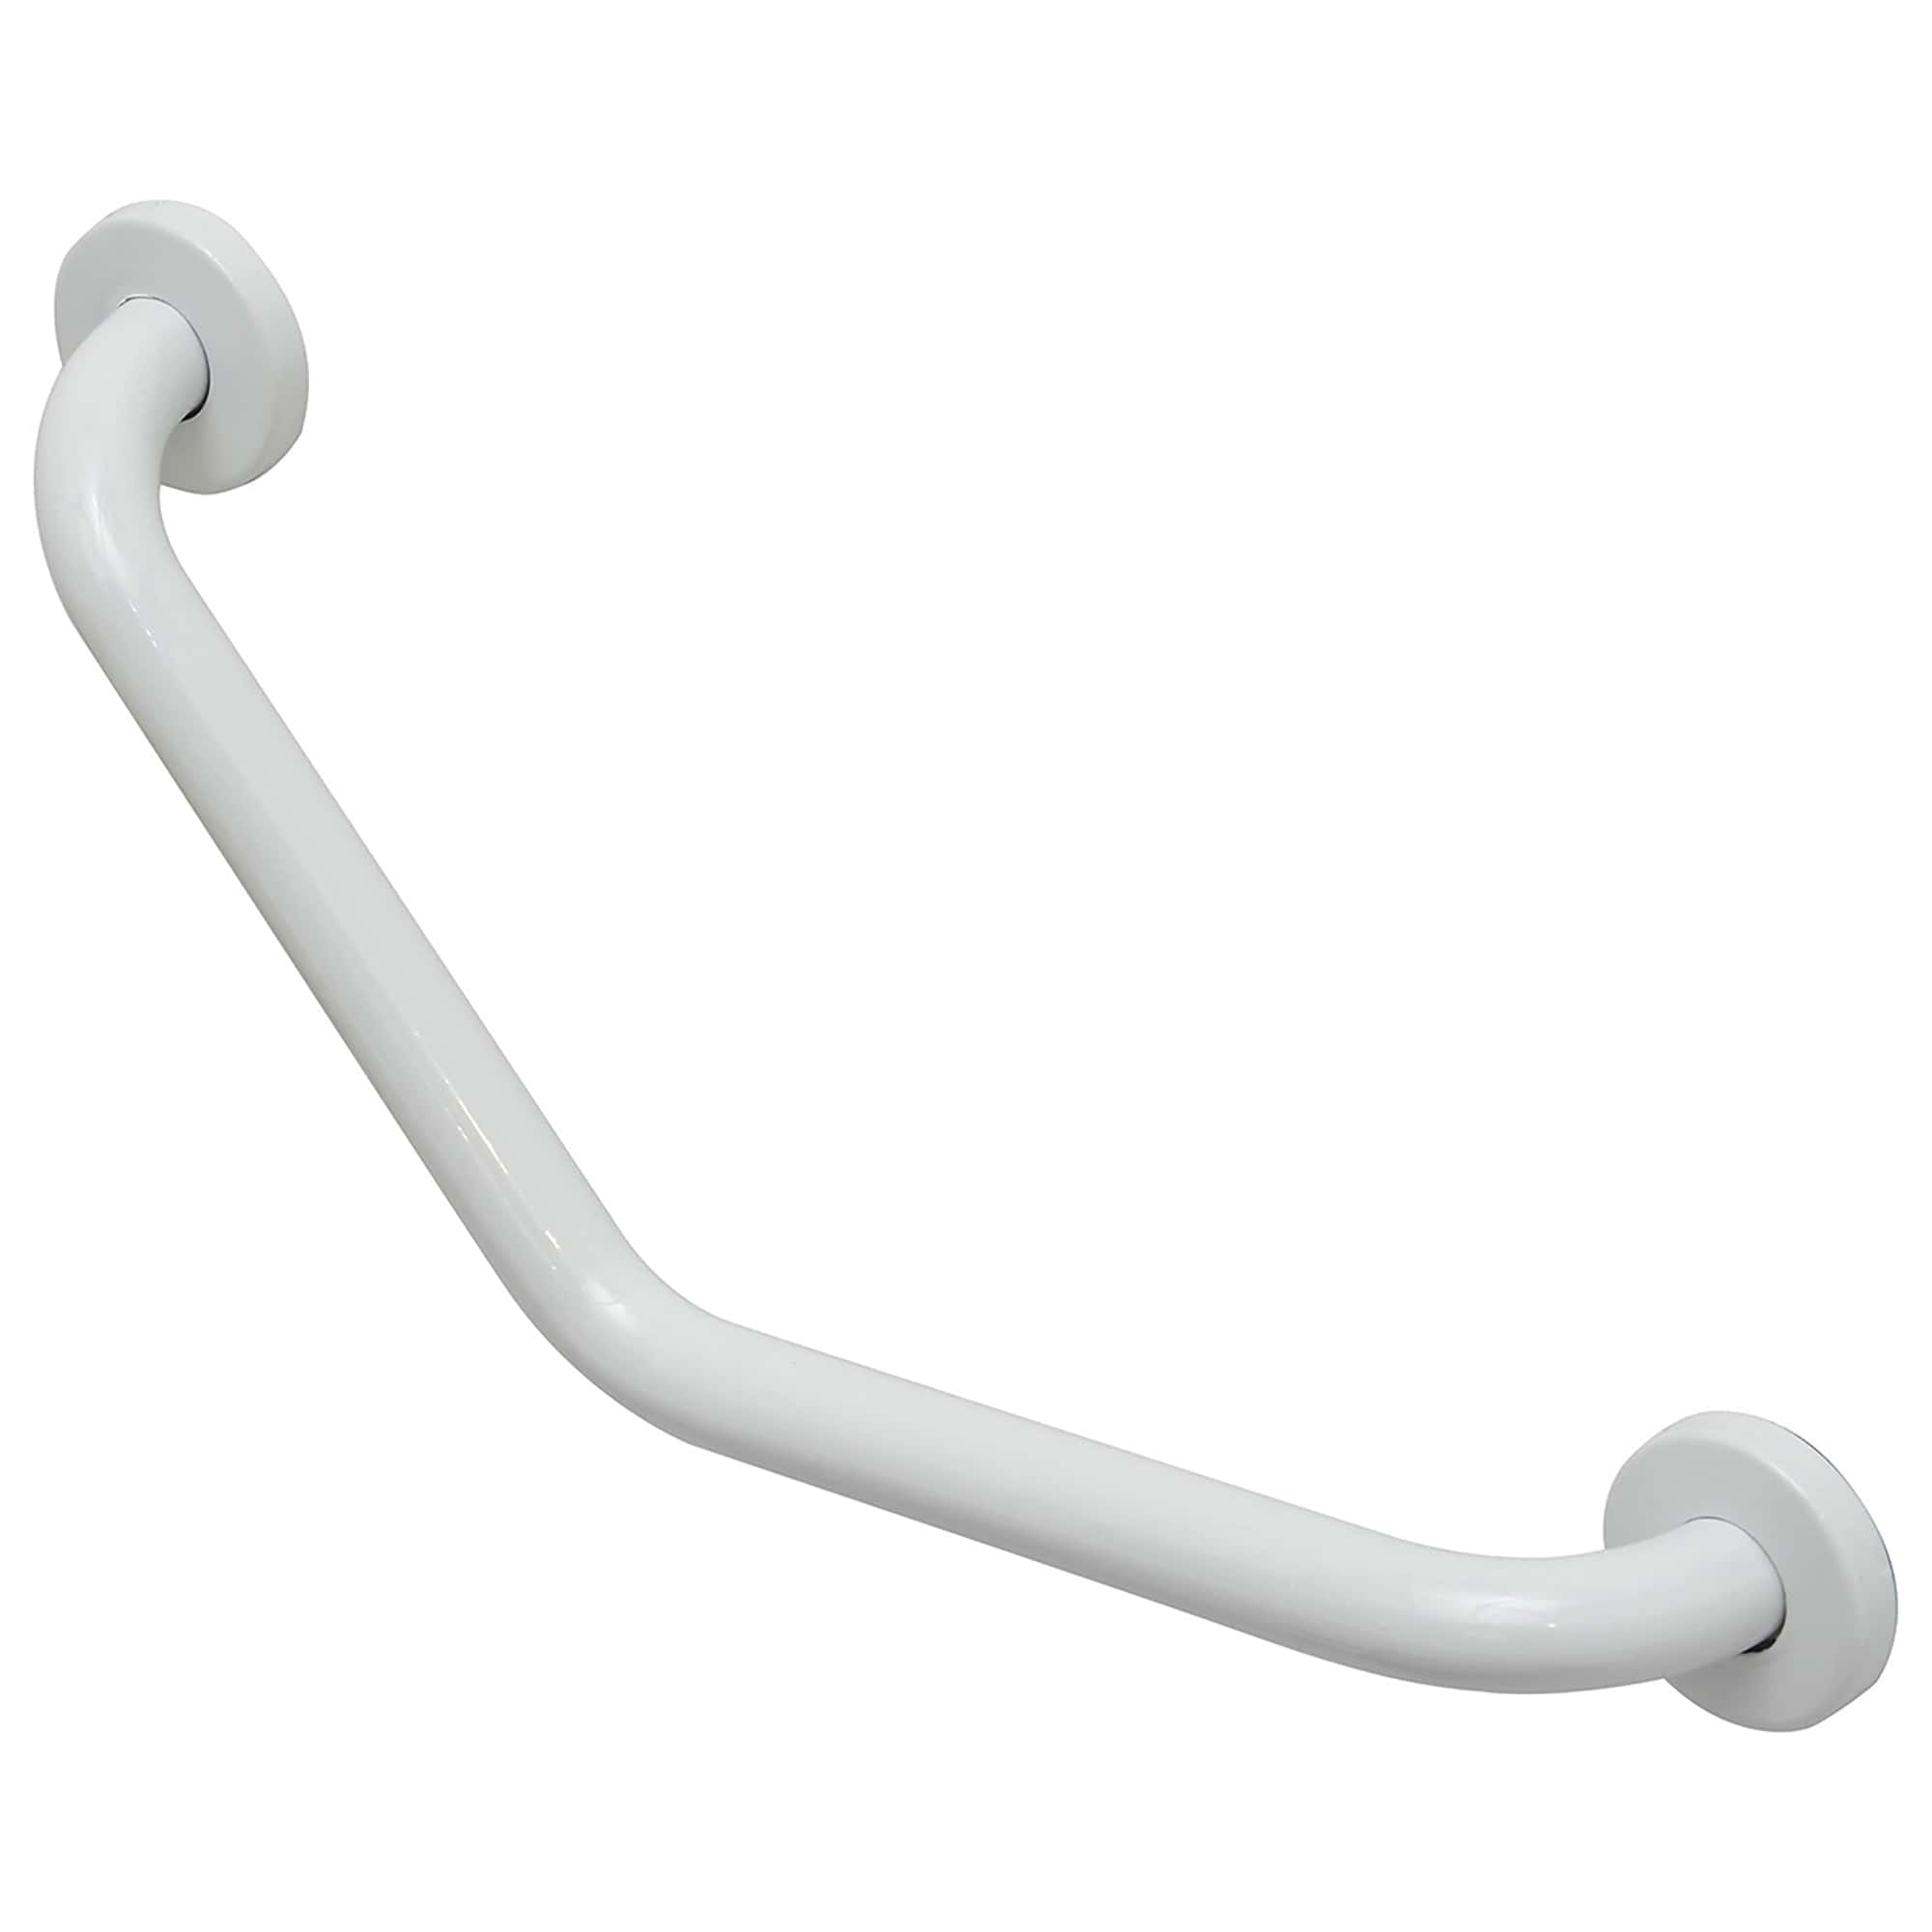 Stainless-Steel-Bath-and-Shower-Curved-Grab-Bar-Concealed-Mounting-Snap-Flange-1-Diameter-8.86-x-8.86-Length-White